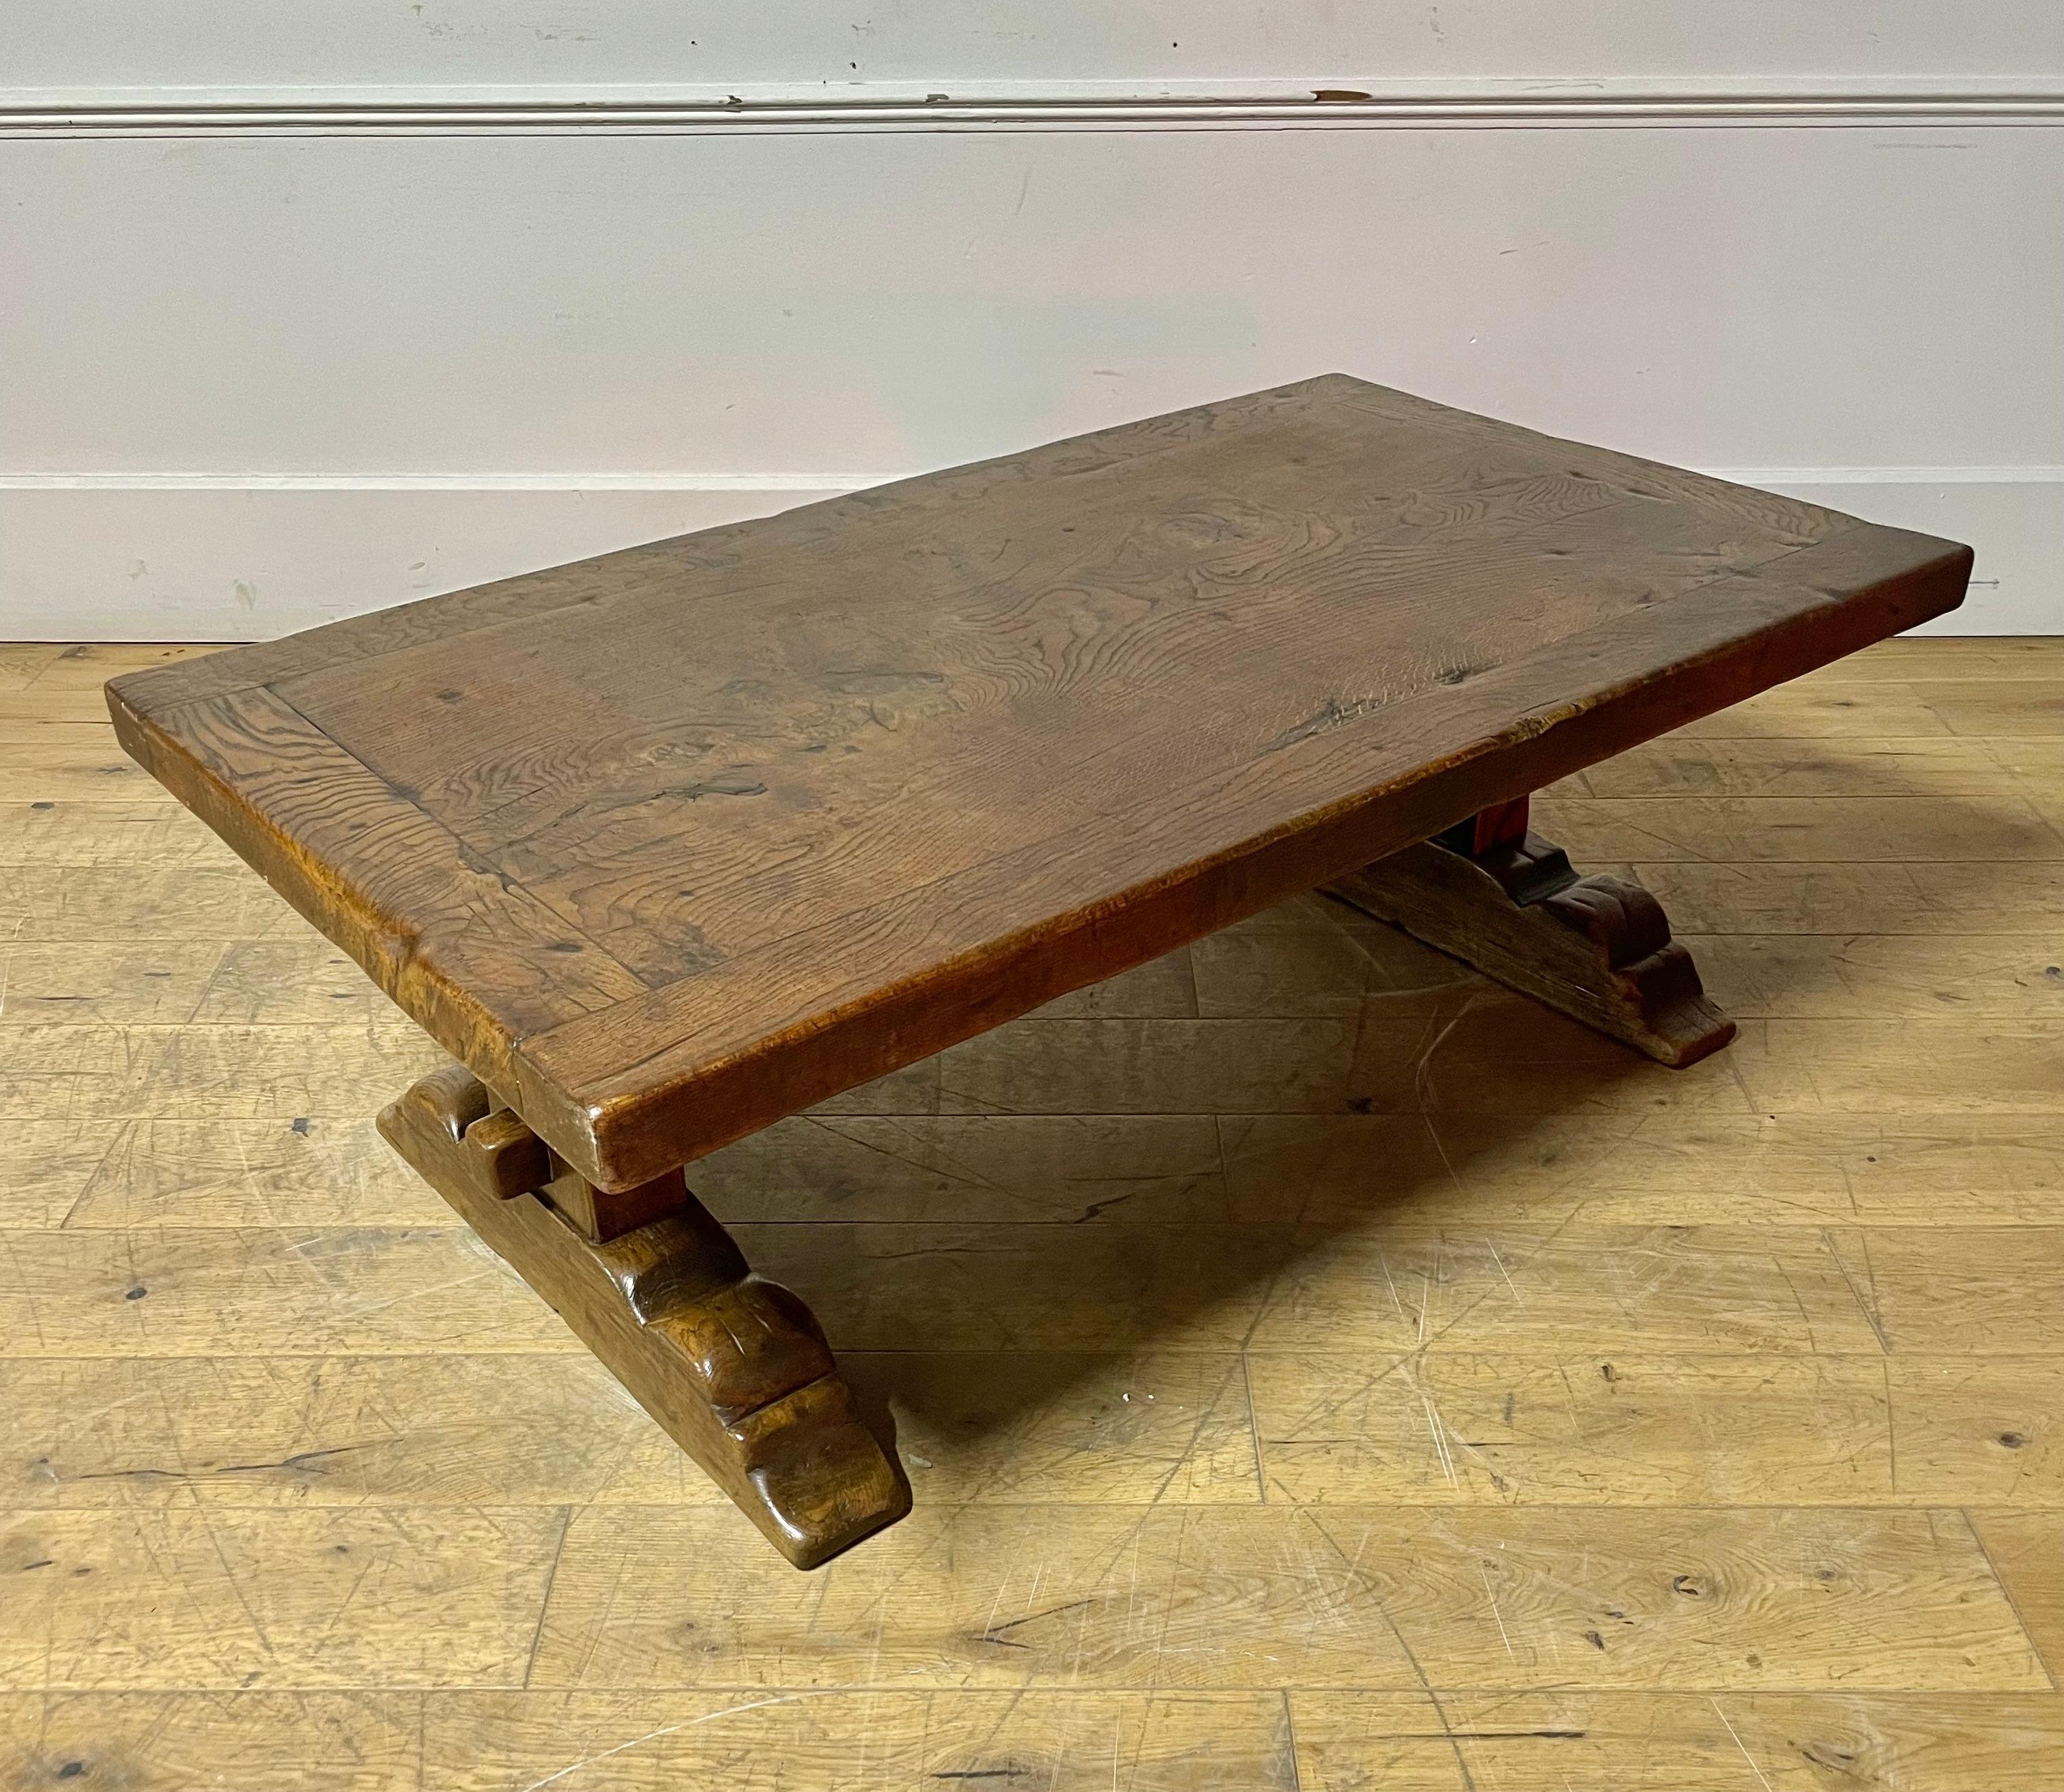 Early 20th century stunning oak coffee table.
French circa 1920s.
Constructed from solid oak, fabulous figured top, the top unbolts for ease of transportation/delivery.
Dimensions: Height 20 inches Width 33.5 inches Length 59 inches.